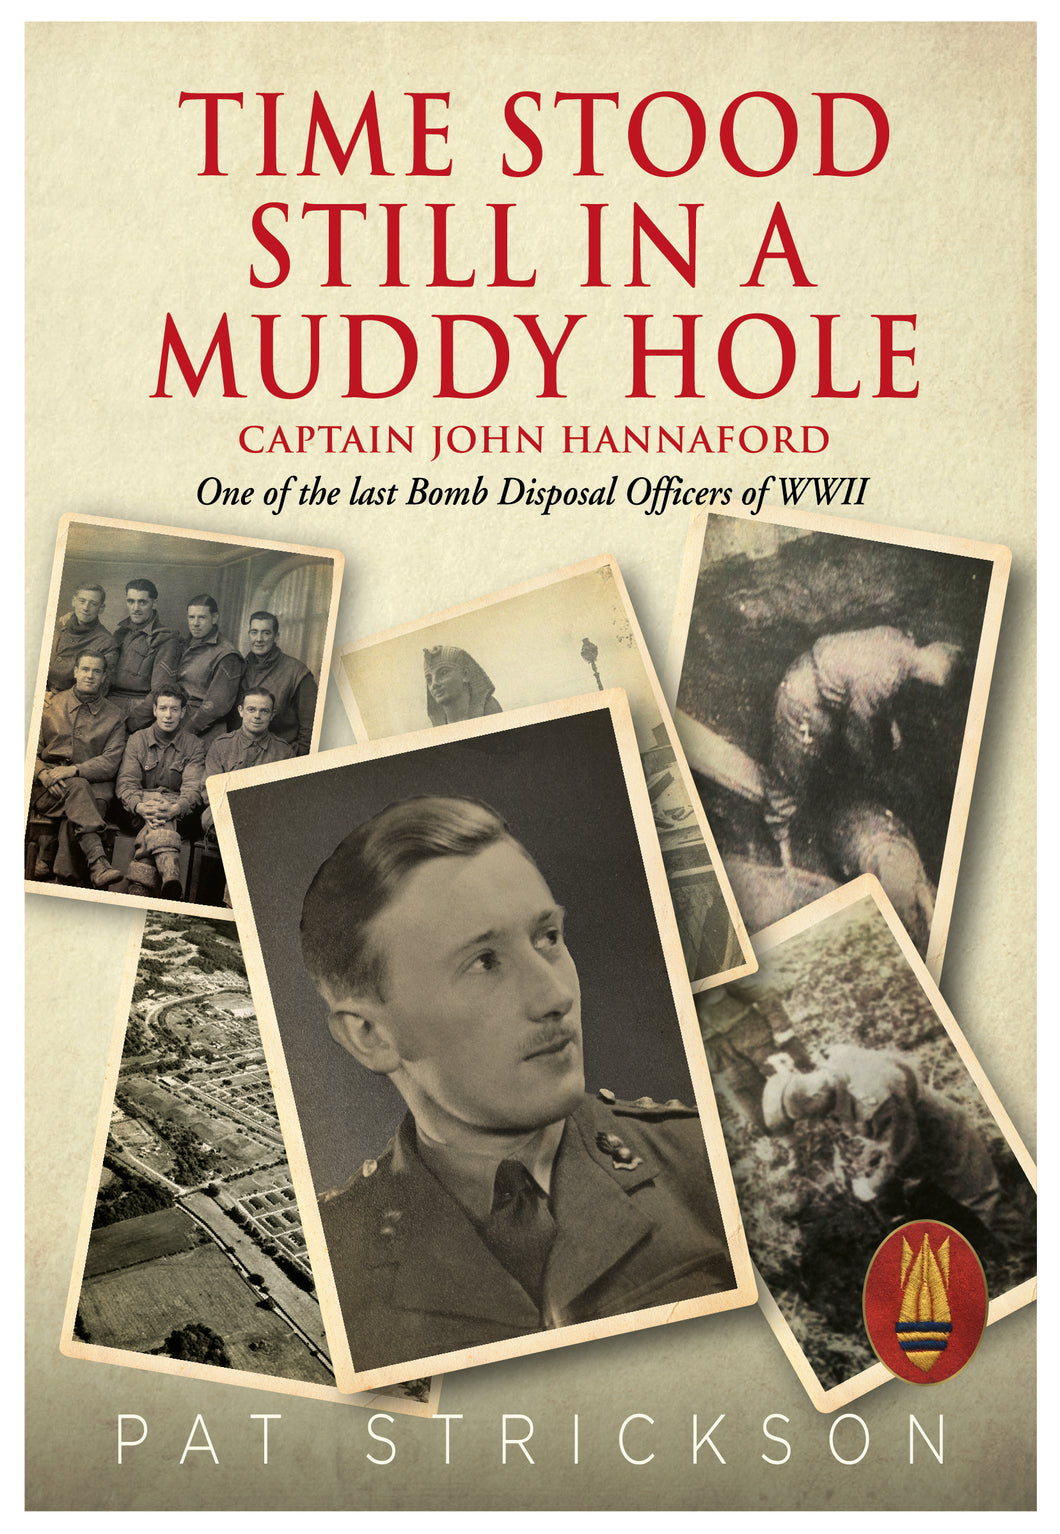 Time Stood Still In A Muddy Hole: Captain John Hannaford, One of the last Bomb Disposal Officers of WWII - Pat Strickson